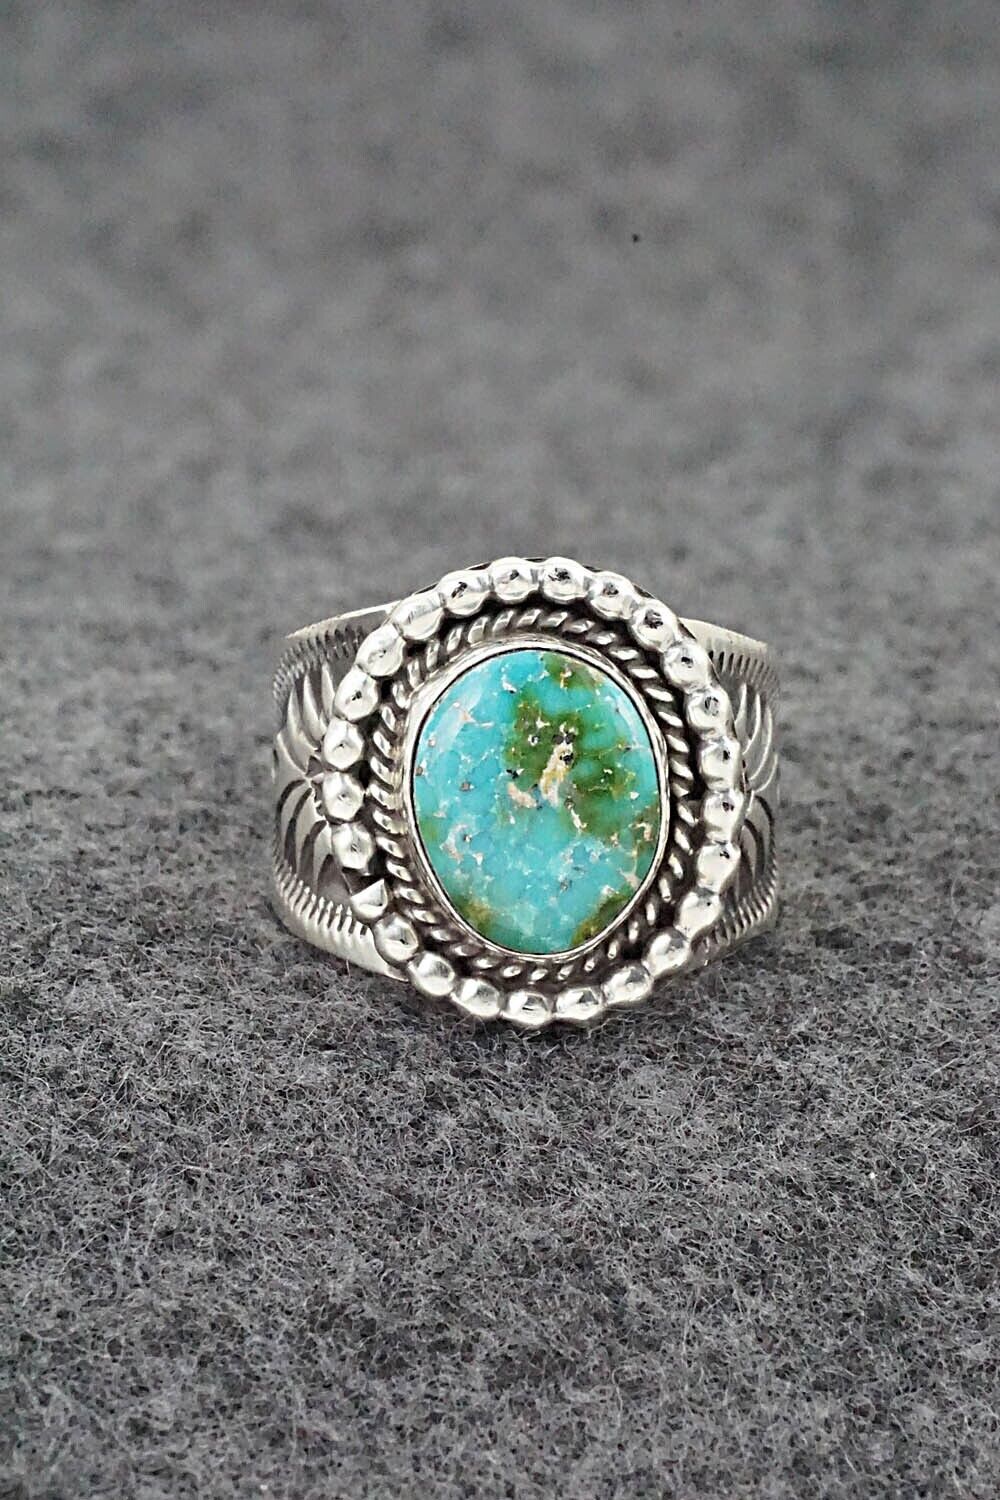 Turquoise & Sterling Silver Ring - Samuel Yellowhair - Size 7.25